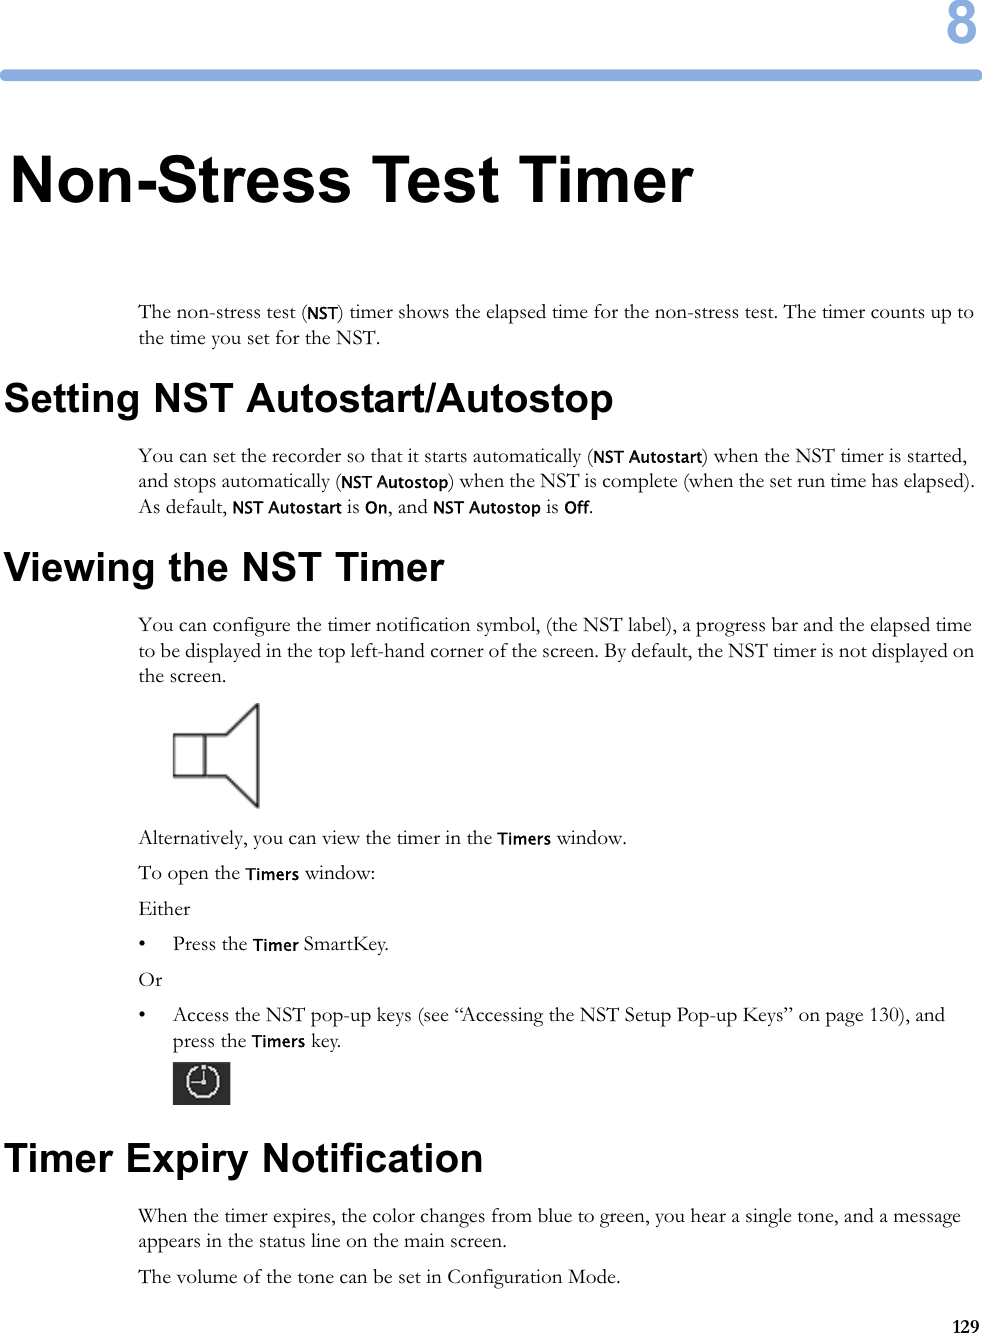 81298Non-Stress Test TimerThe non-stress test (NST) timer shows the elapsed time for the non-stress test. The timer counts up to the time you set for the NST.Setting NST Autostart/AutostopYou can set the recorder so that it starts automatically (NST Autostart) when the NST timer is started, and stops automatically (NST Autostop) when the NST is complete (when the set run time has elapsed). As default, NST Autostart is On, and NST Autostop is Off.Viewing the NST TimerYou can configure the timer notification symbol, (the NST label), a progress bar and the elapsed time to be displayed in the top left-hand corner of the screen. By default, the NST timer is not displayed on the screen.Alternatively, you can view the timer in the Timers window.To open the Timers window:Either• Press the Timer SmartKey.Or• Access the NST pop-up keys (see “Accessing the NST Setup Pop-up Keys” on page 130), and press the Timers key.Timer Expiry NotificationWhen the timer expires, the color changes from blue to green, you hear a single tone, and a message appears in the status line on the main screen.The volume of the tone can be set in Configuration Mode.